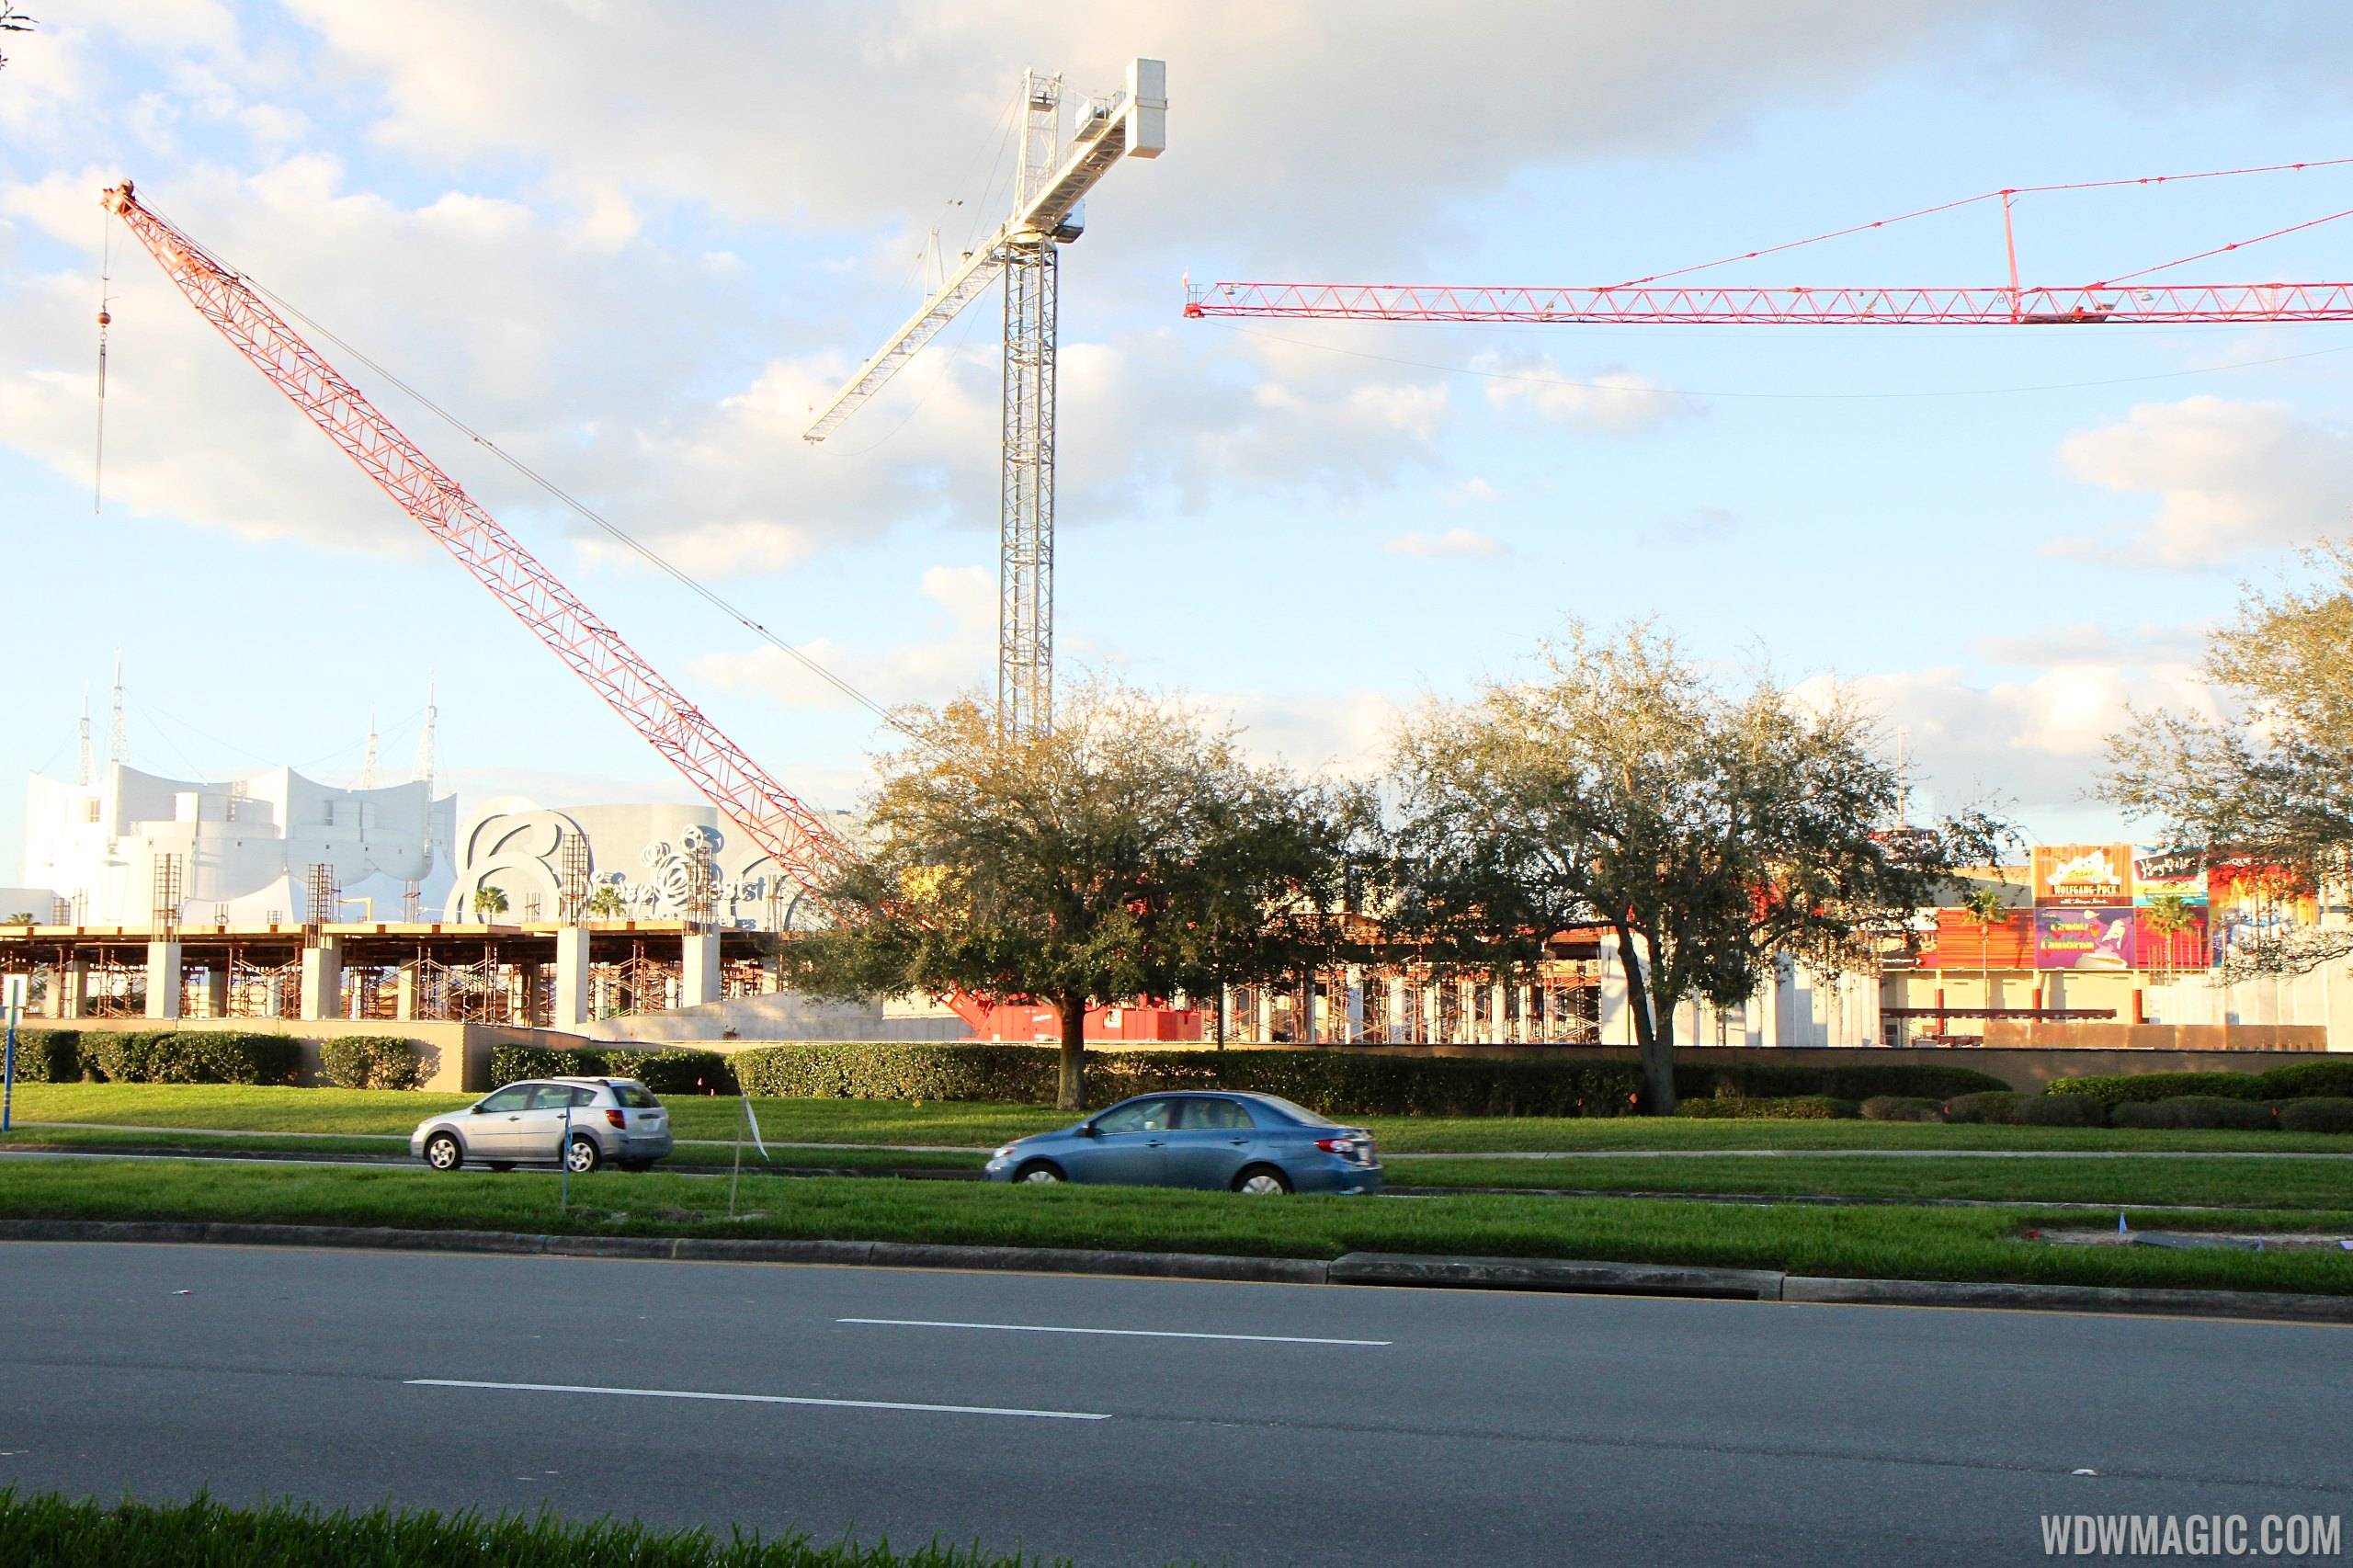 PHOTOS - Latest look at the Disney Springs West Side parking garage construction